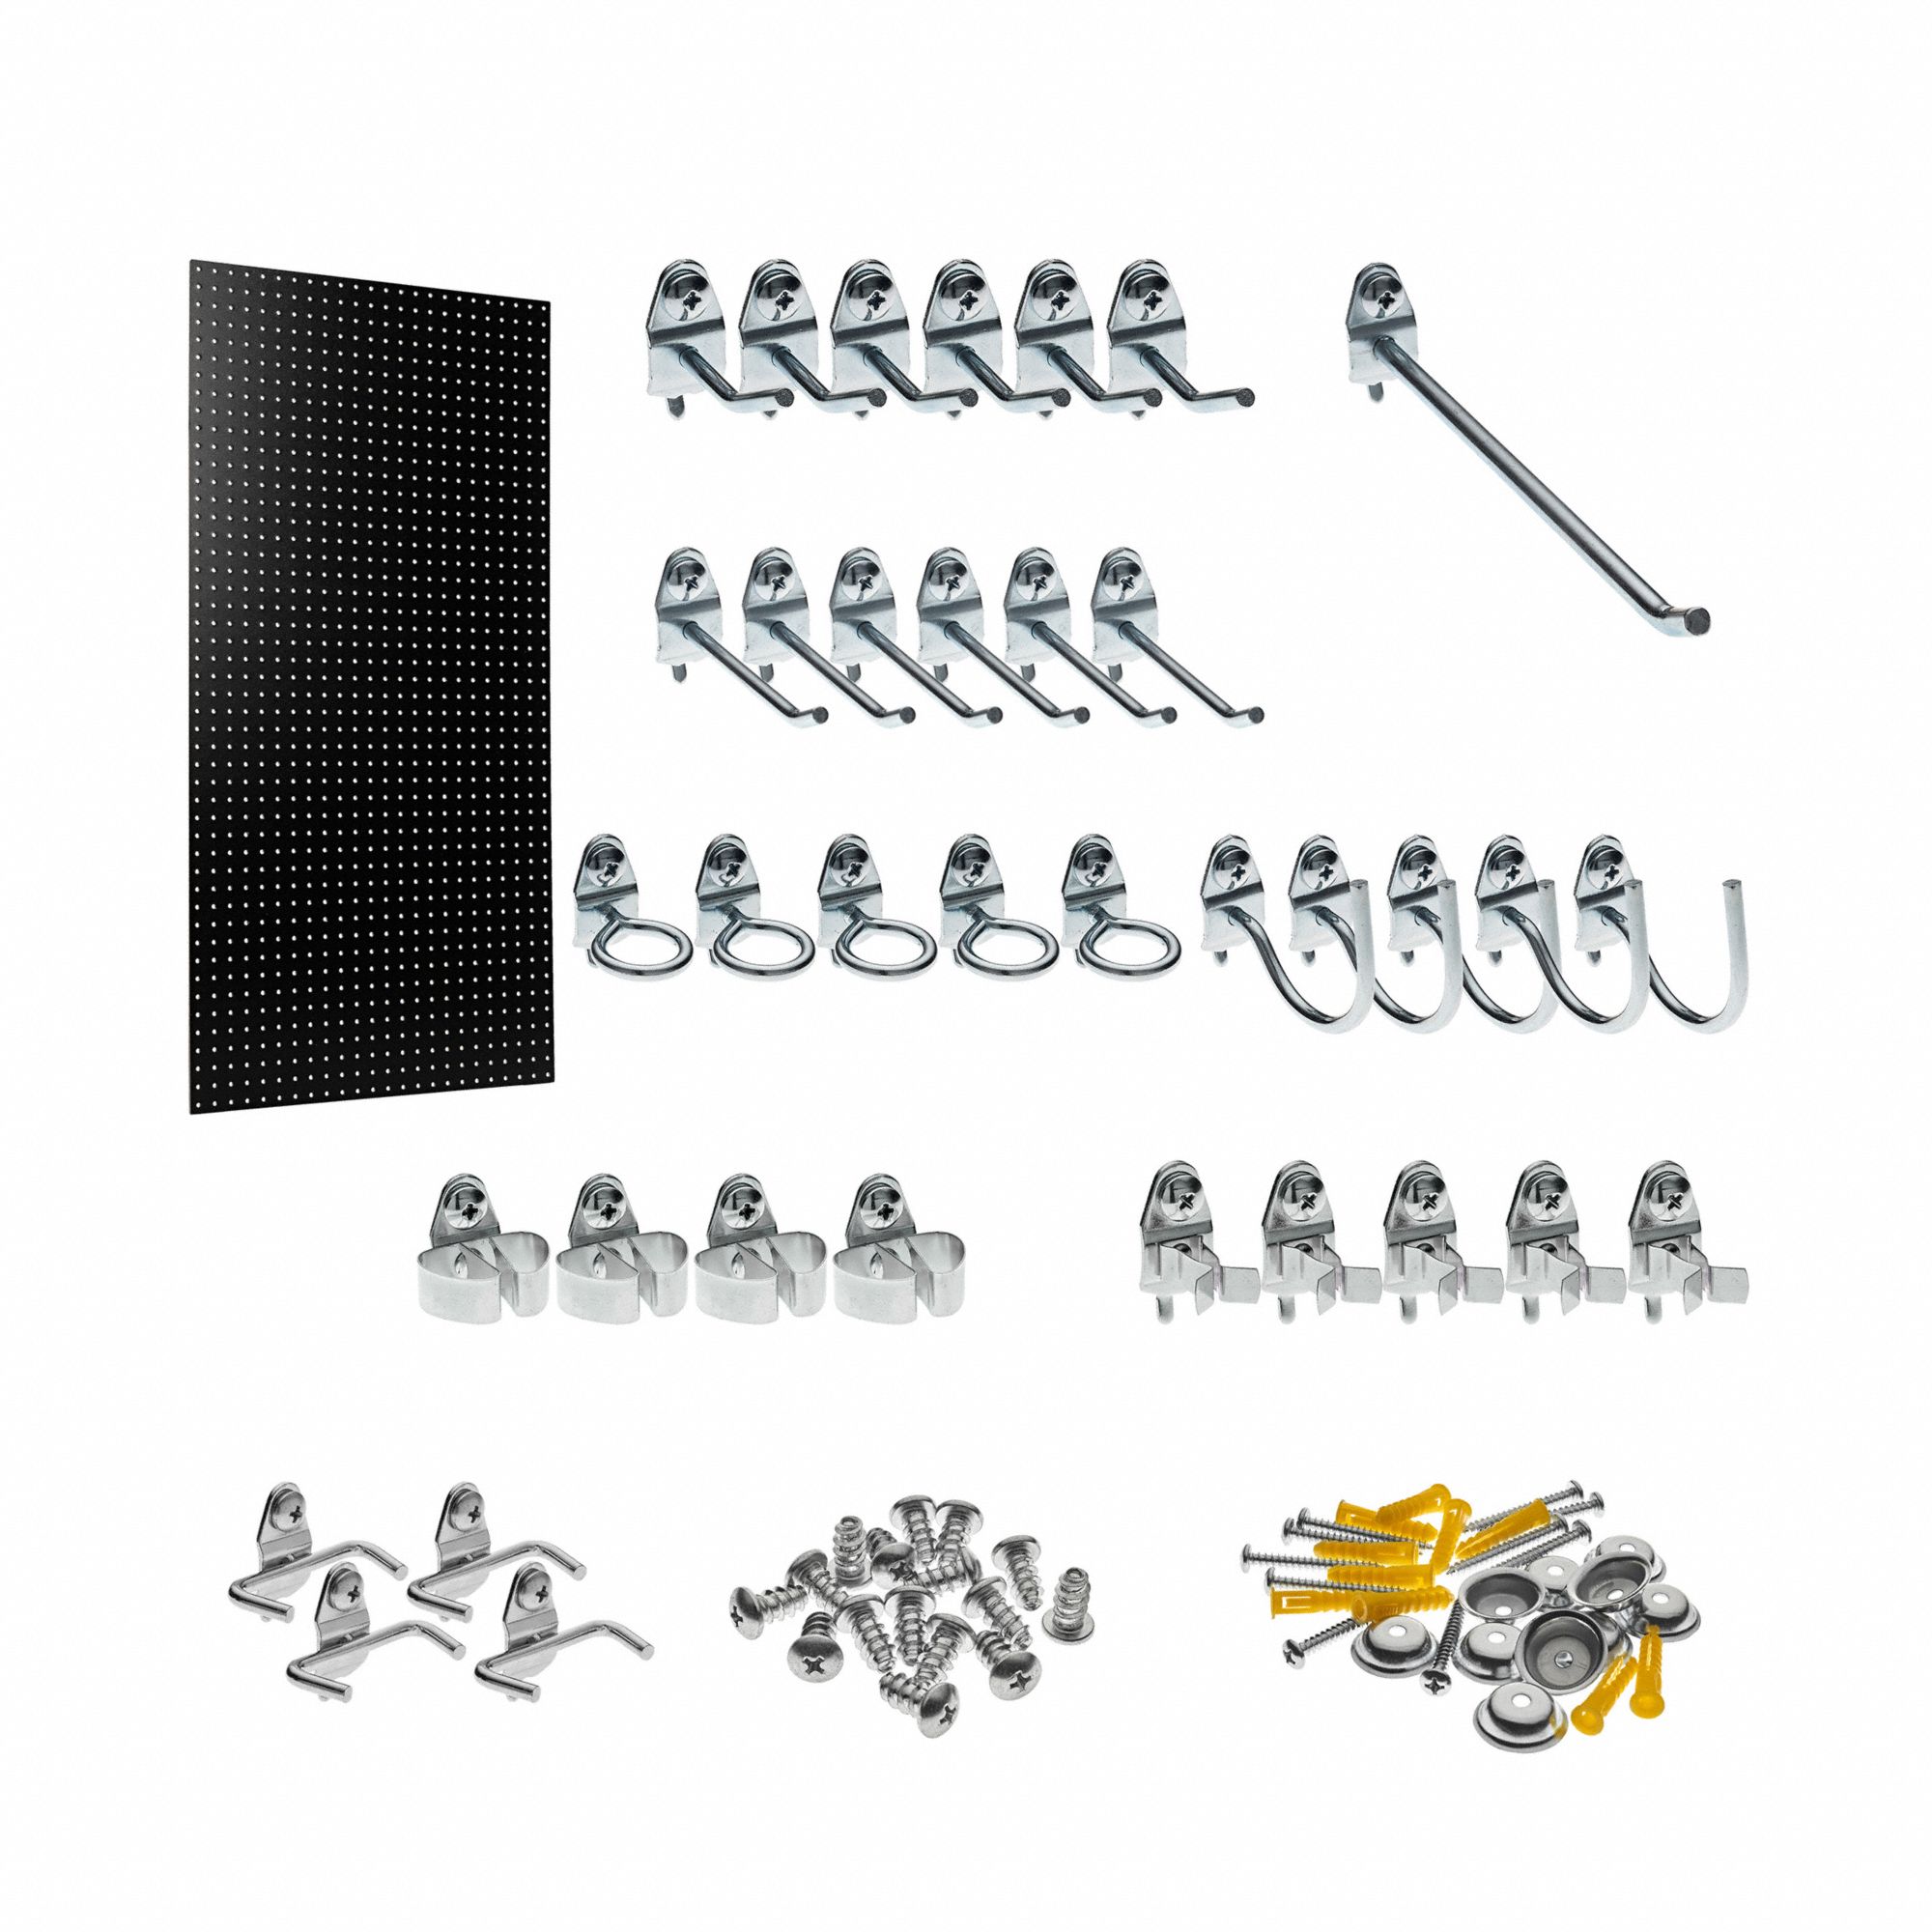 Pegboard Panel Kit: Round, 9/32 in Peg Hole Size, 48 in x 24 in x 1/8 in